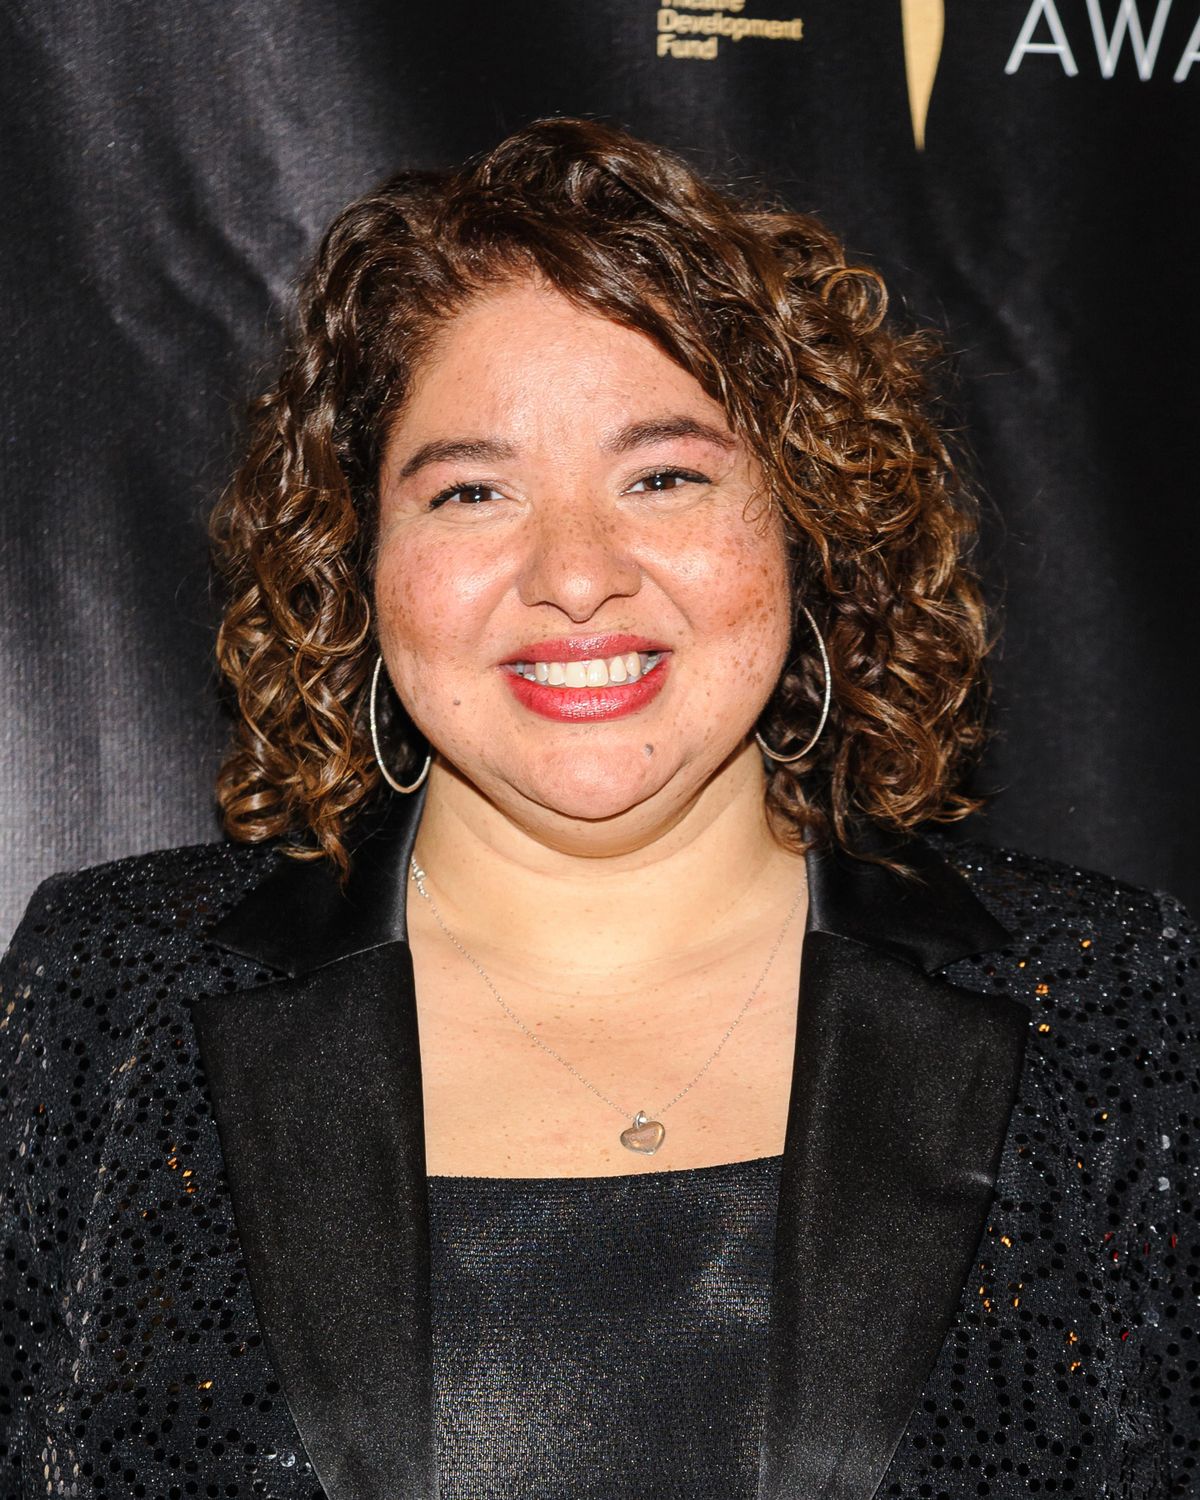 In this May 1, 2016  photo, Liesl Tommy attends The 2016 Lucille Lortel Awards for Outstanding Achievement Off-Broadway in New York. Tommy, the South African-born director, will direct the Arethan Franklin biopic “Respect,” according to a Thursday, Jan. 10, 2019, statement from Motion Picture Group. (Christopher Smith / Invision/Associated Press)